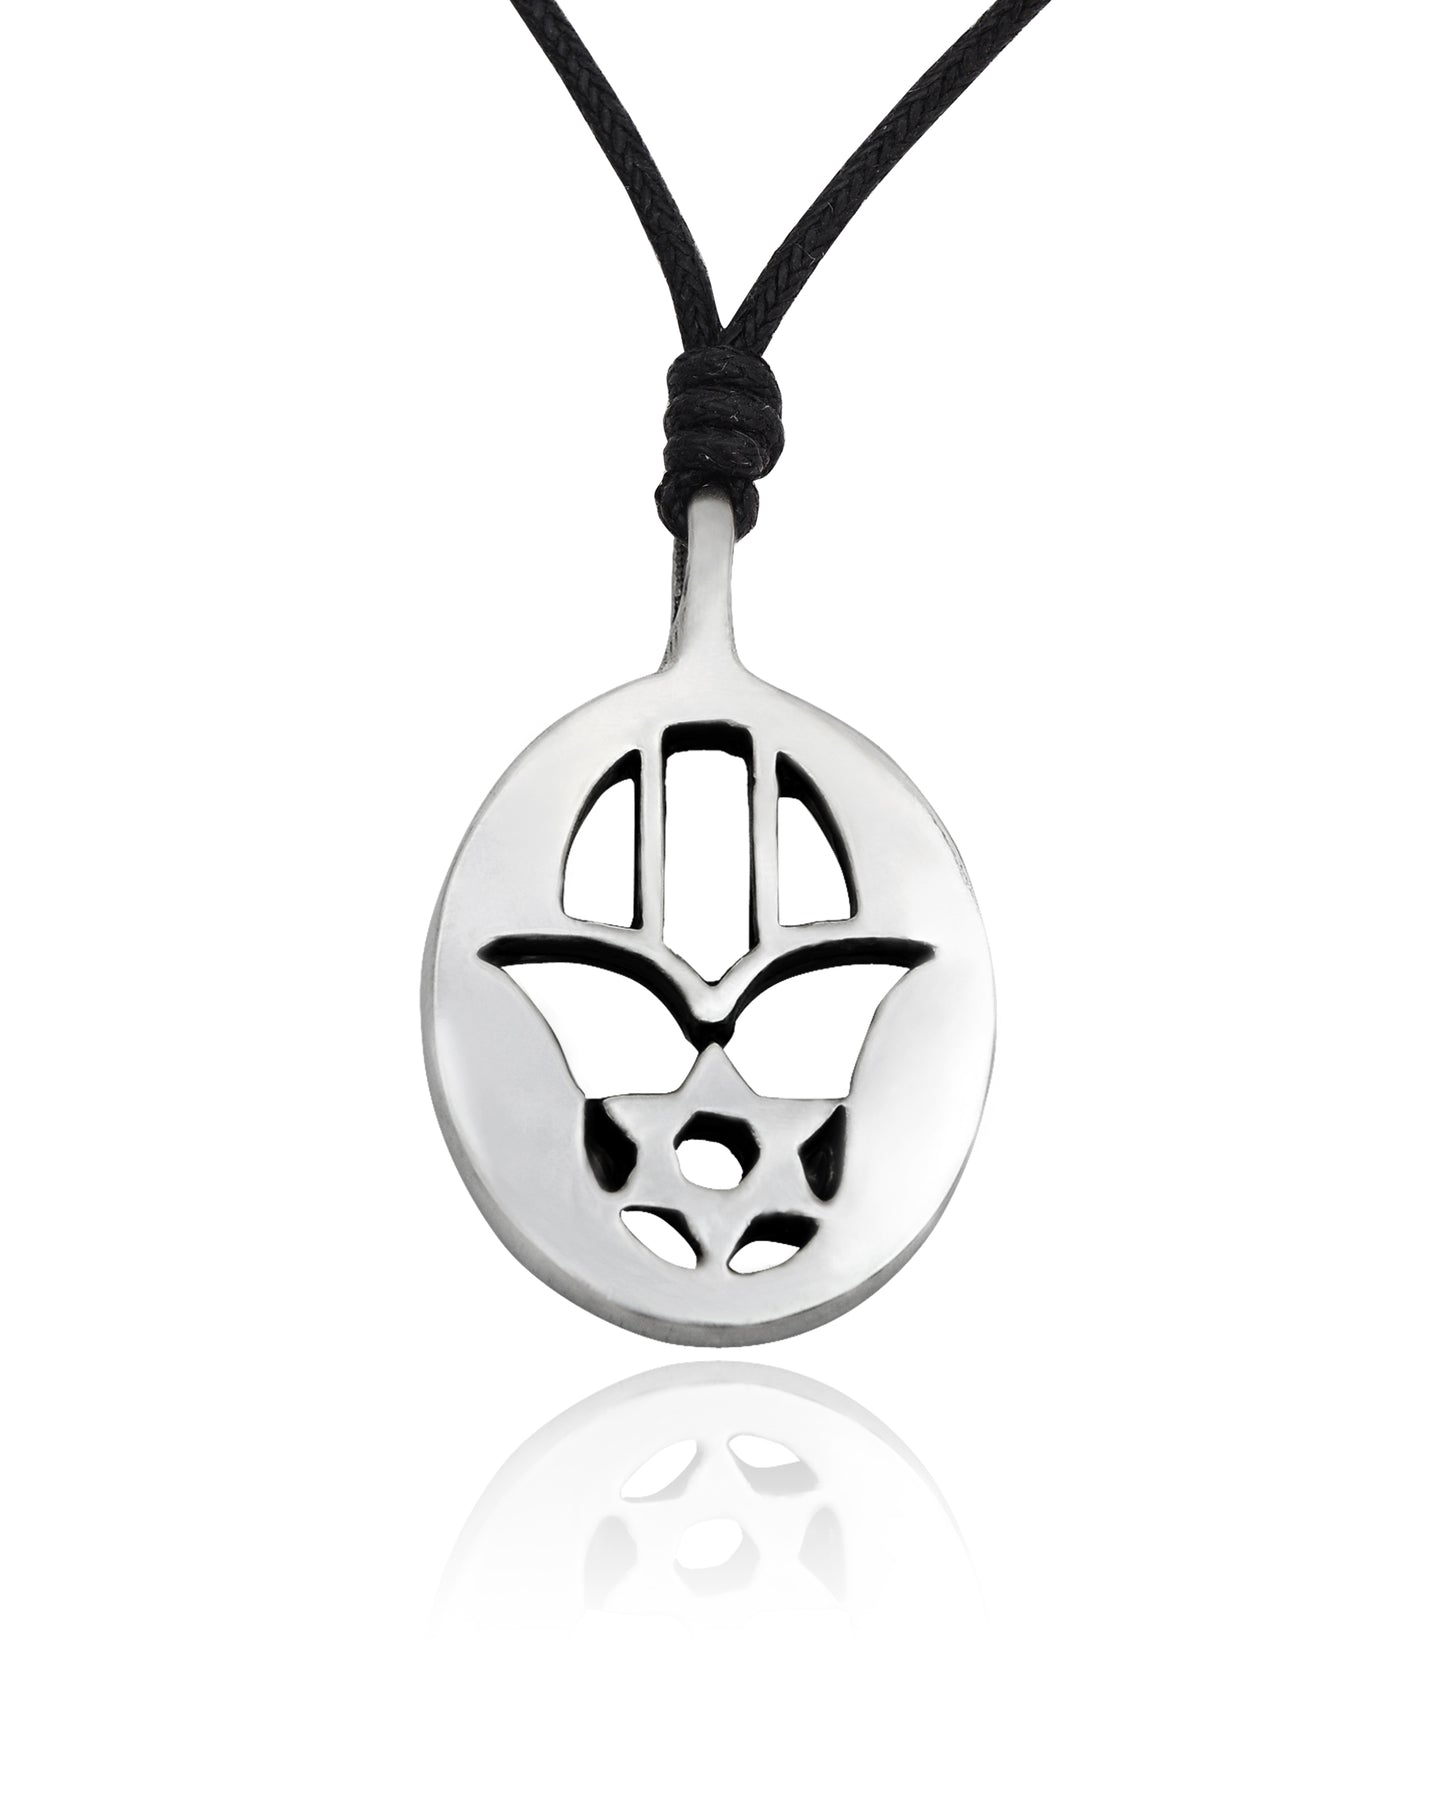 The Hamsa (Hand of God) Pewter Charm Necklace Pendant Jewelry